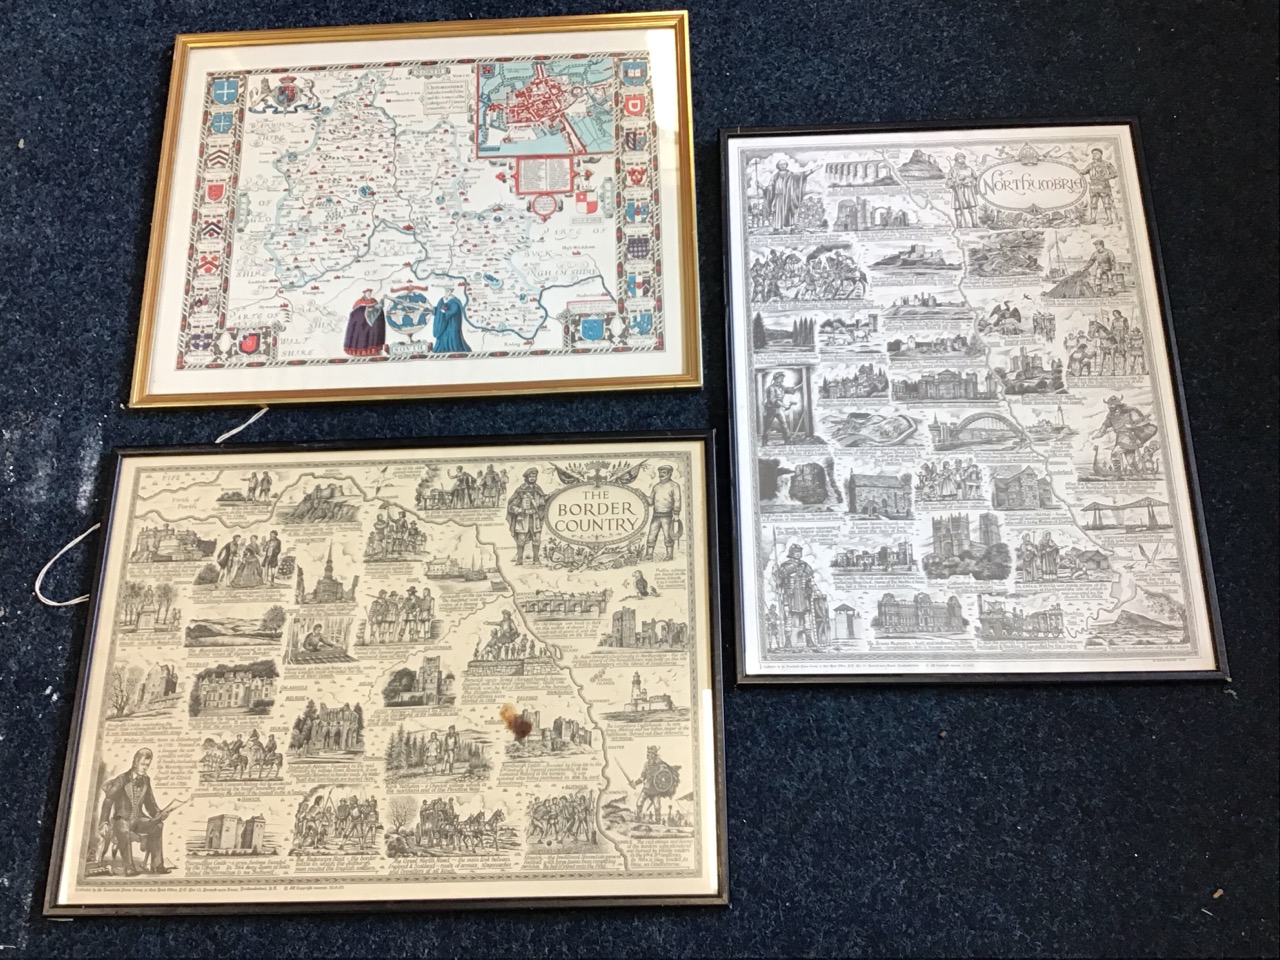 A framed coloured reproduction map of Oxfordshire - 20.75in x 15.25in; a Tweeddale Press map by